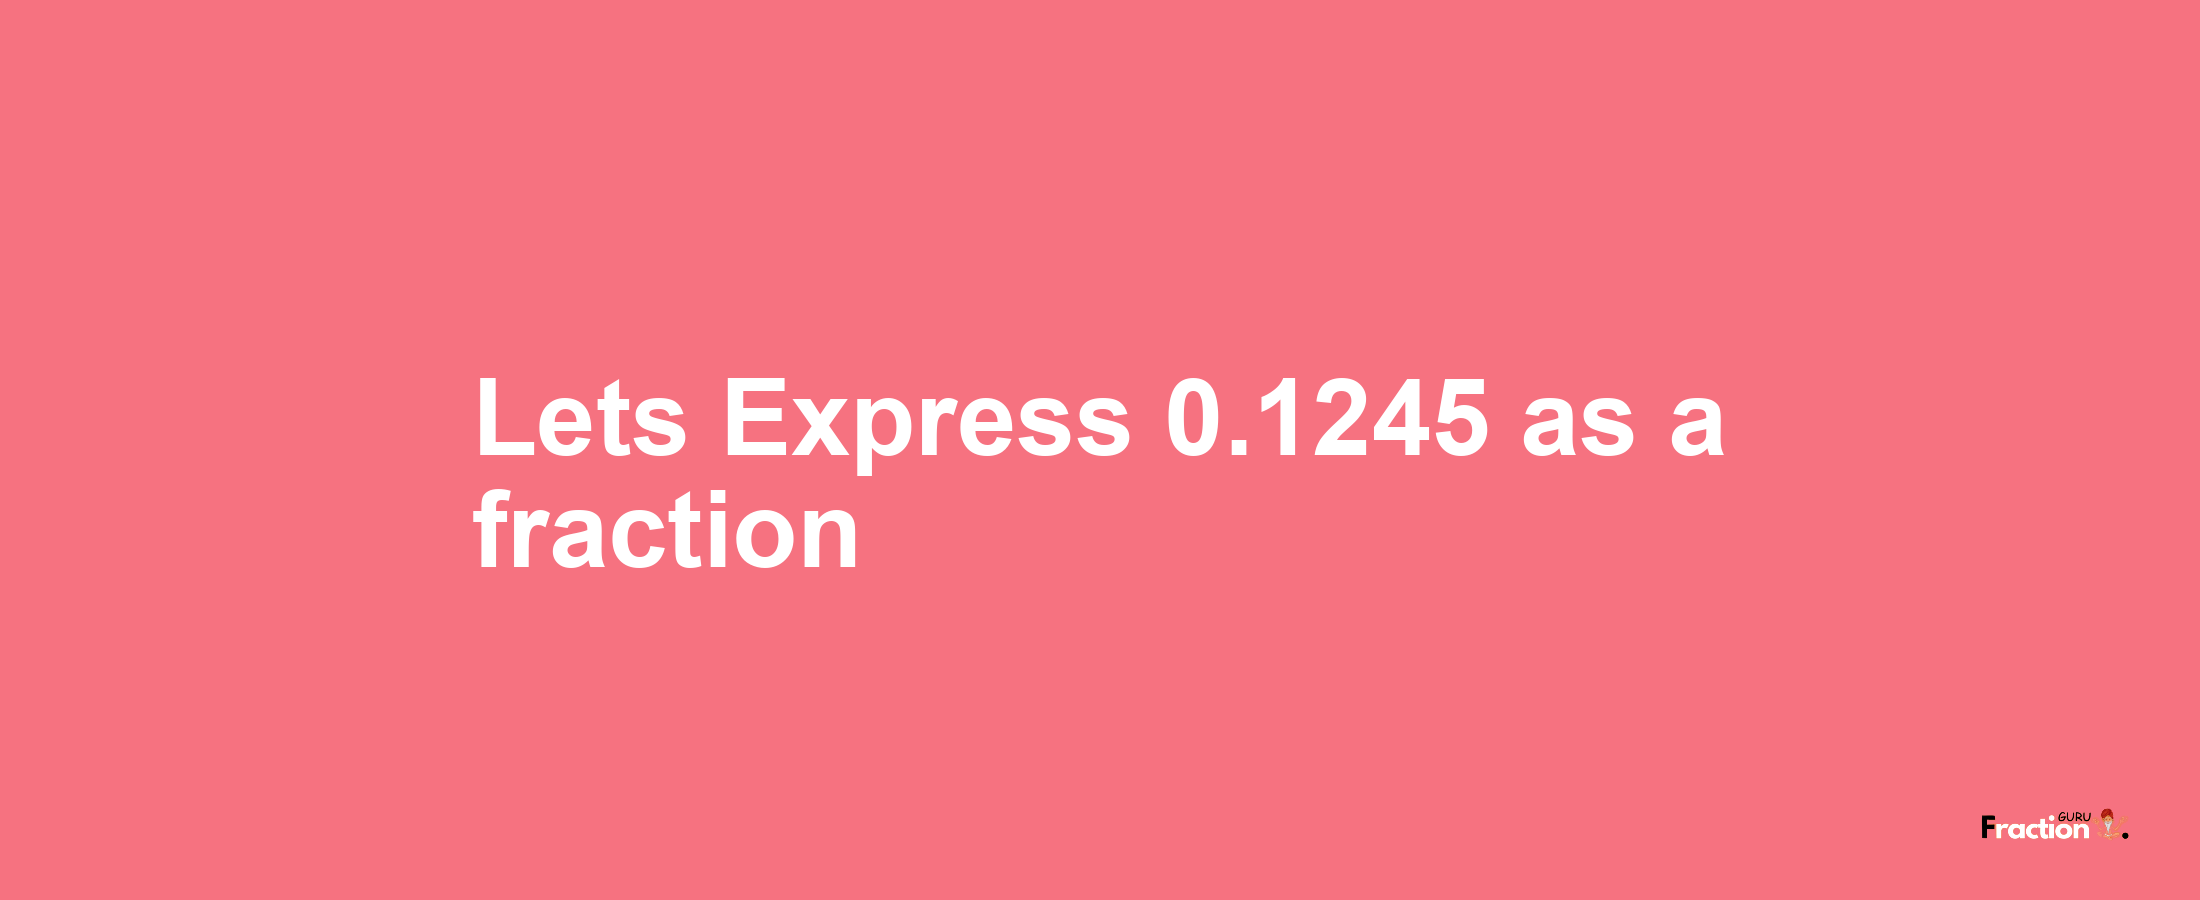 Lets Express 0.1245 as afraction